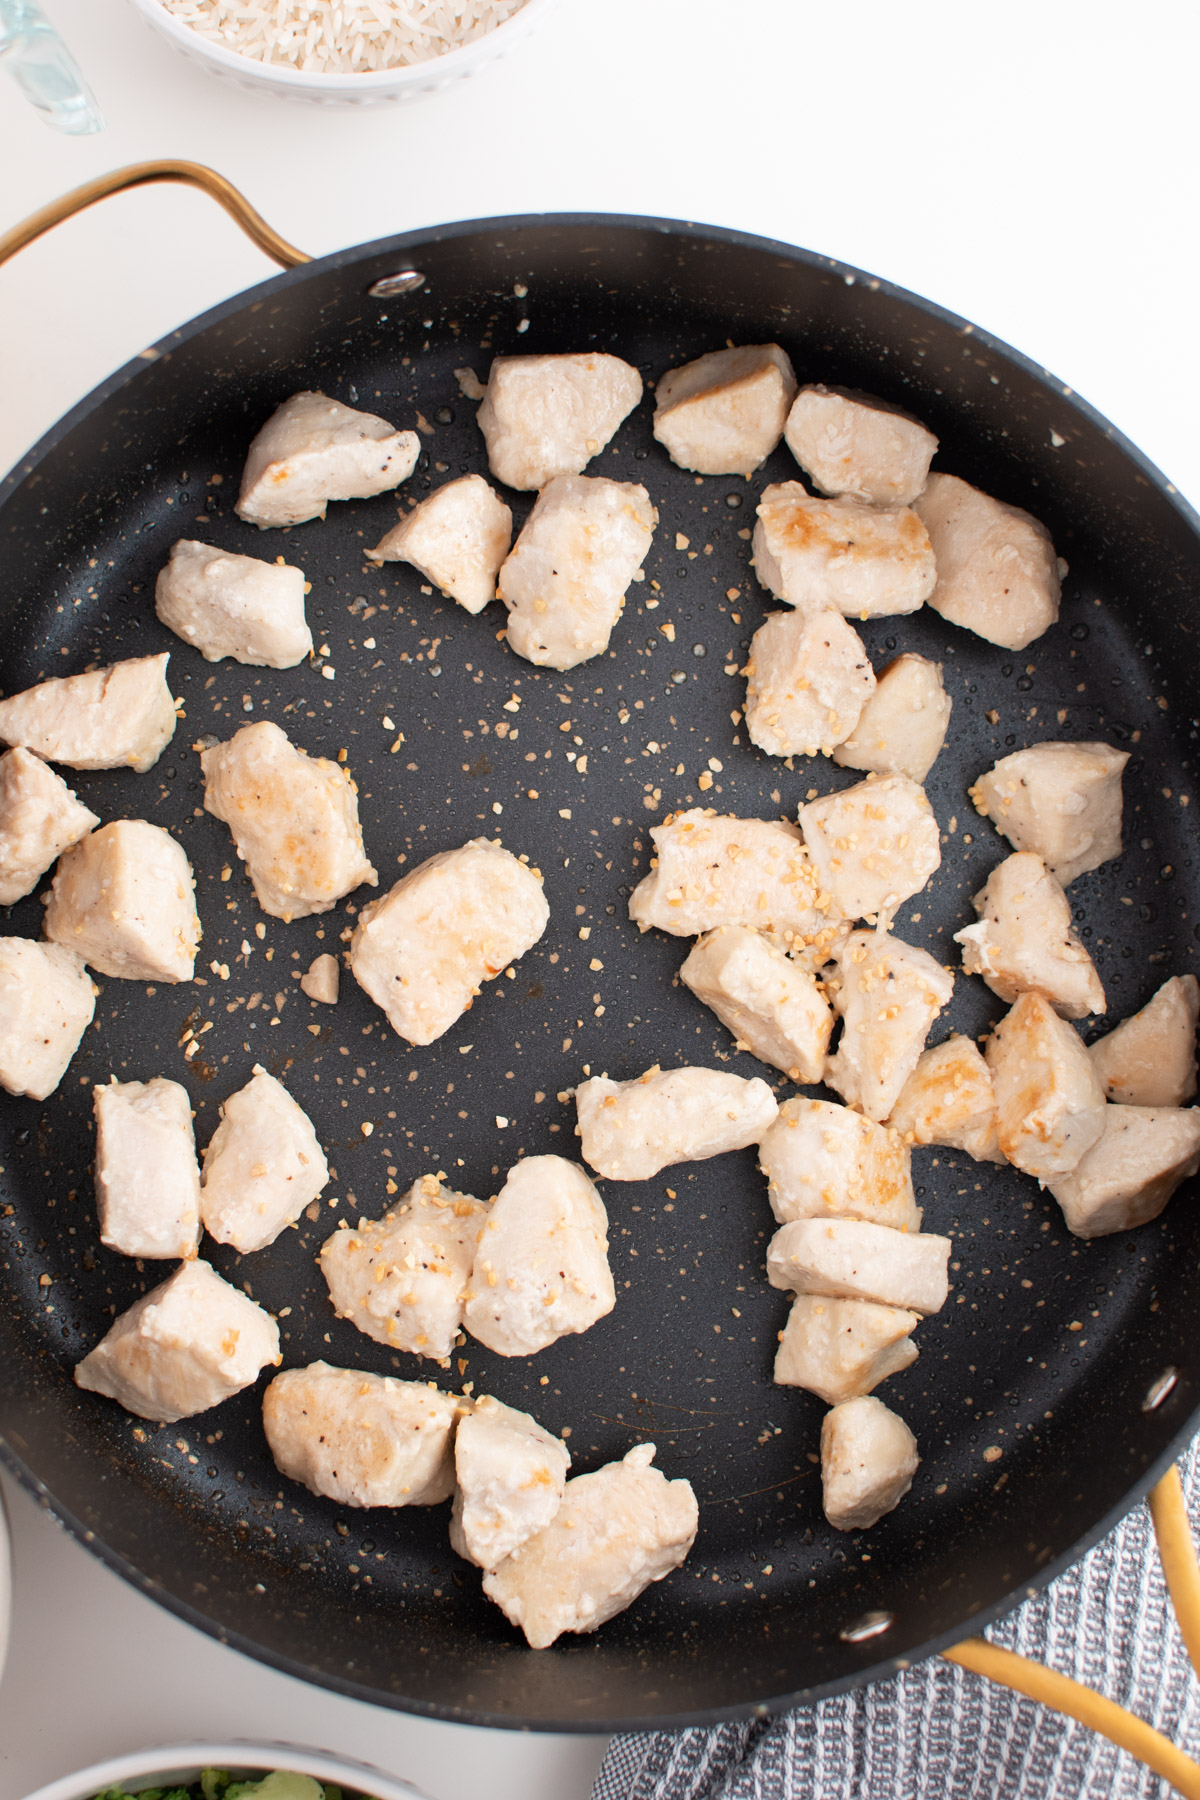 Minced garlic in large black skillet with browned chicken pieces.